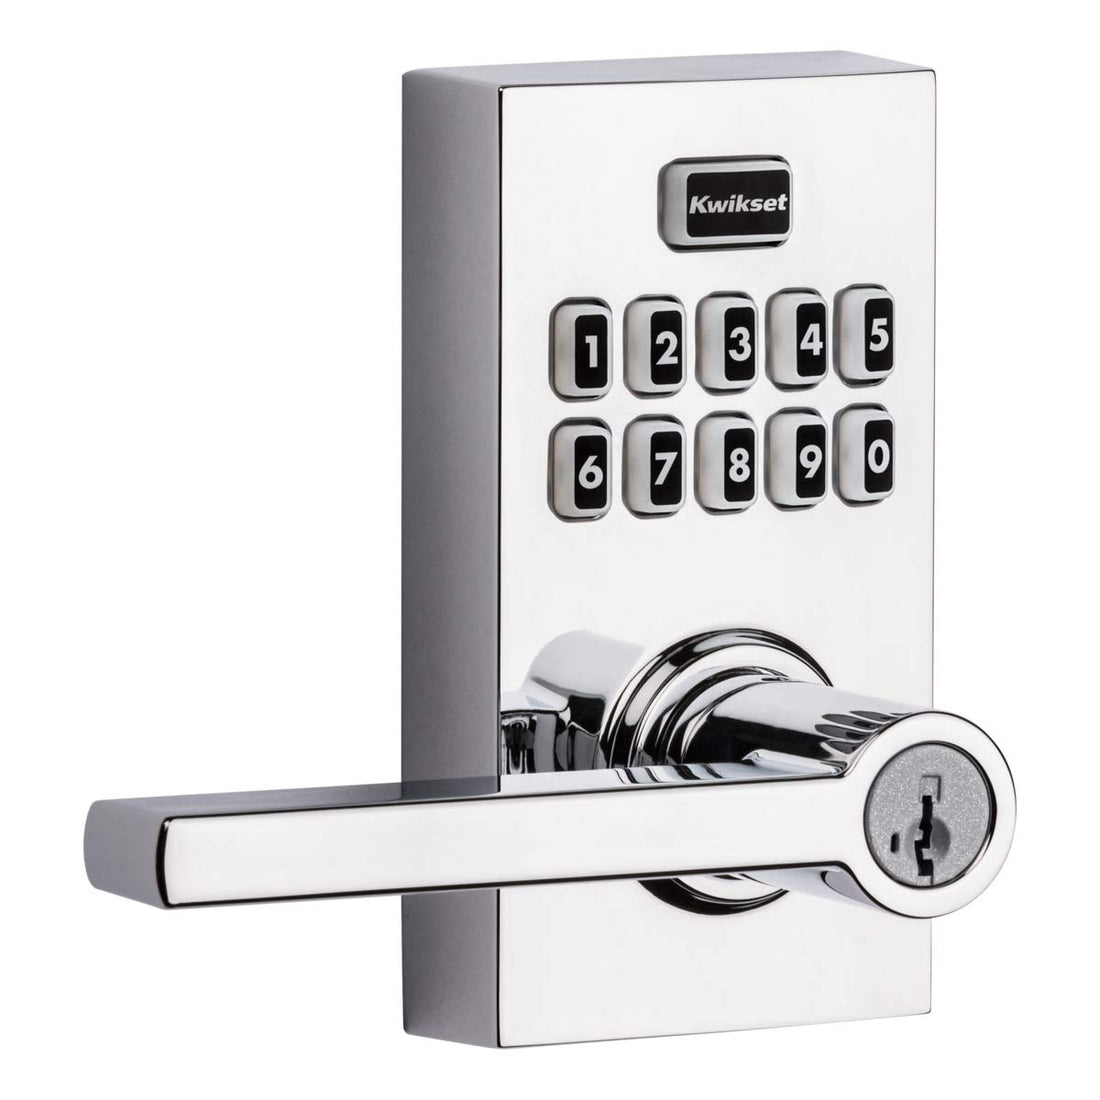 Kwikset 99170-005 SmartCode 917 Keyless Entry Contemporary Residential Keypad Electronic Lever Lock Deadbolt Alternative with Halifax Door Handle and SmartKey Security, Polished Chrome